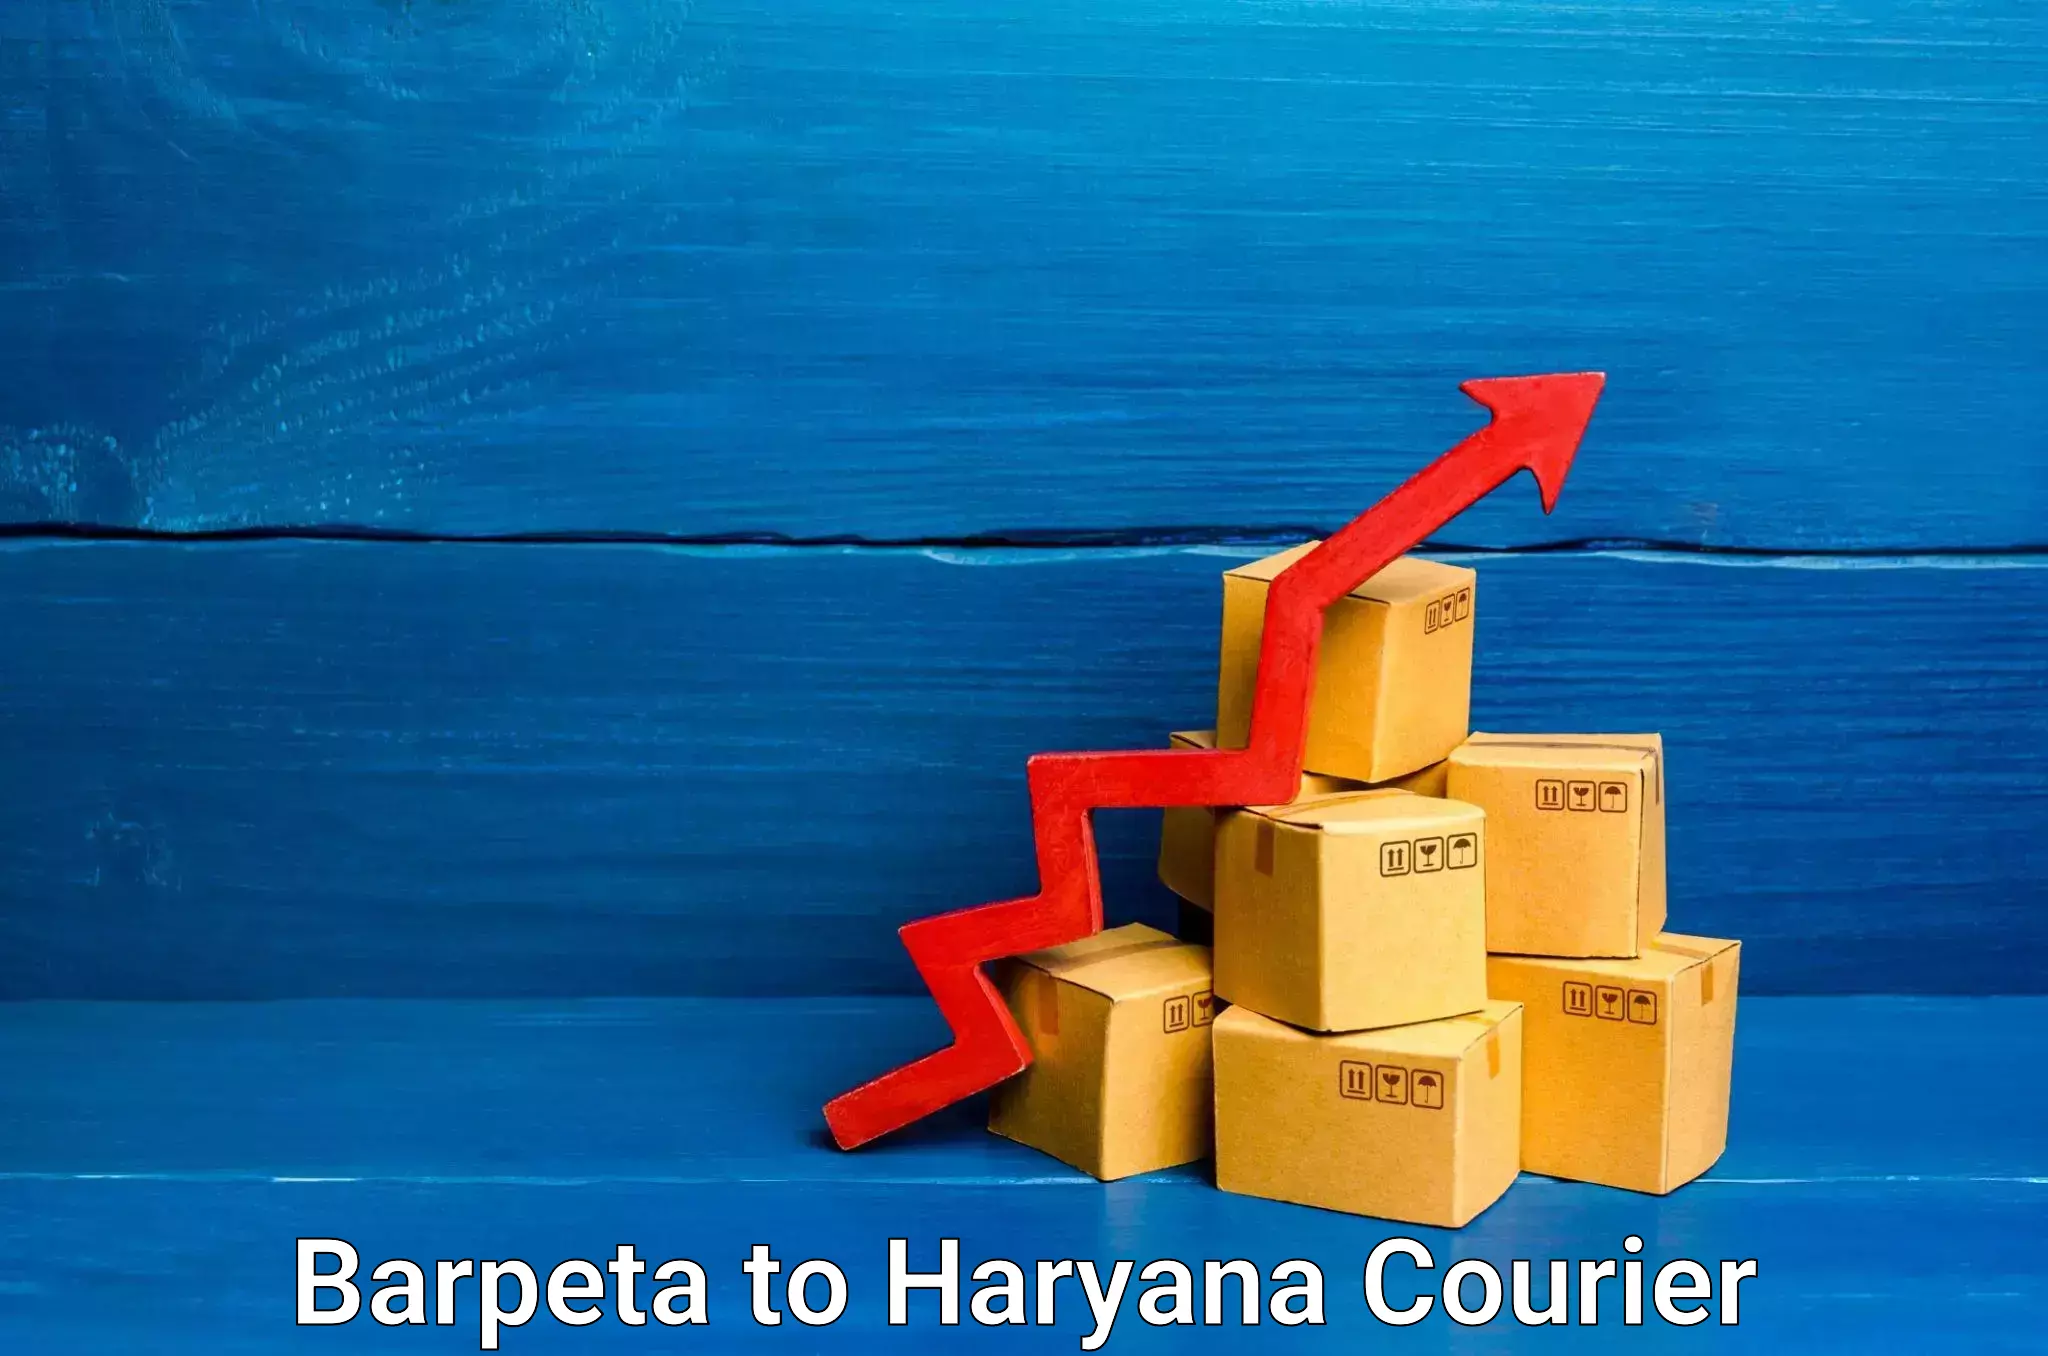 State-of-the-art courier technology Barpeta to Jhajjar